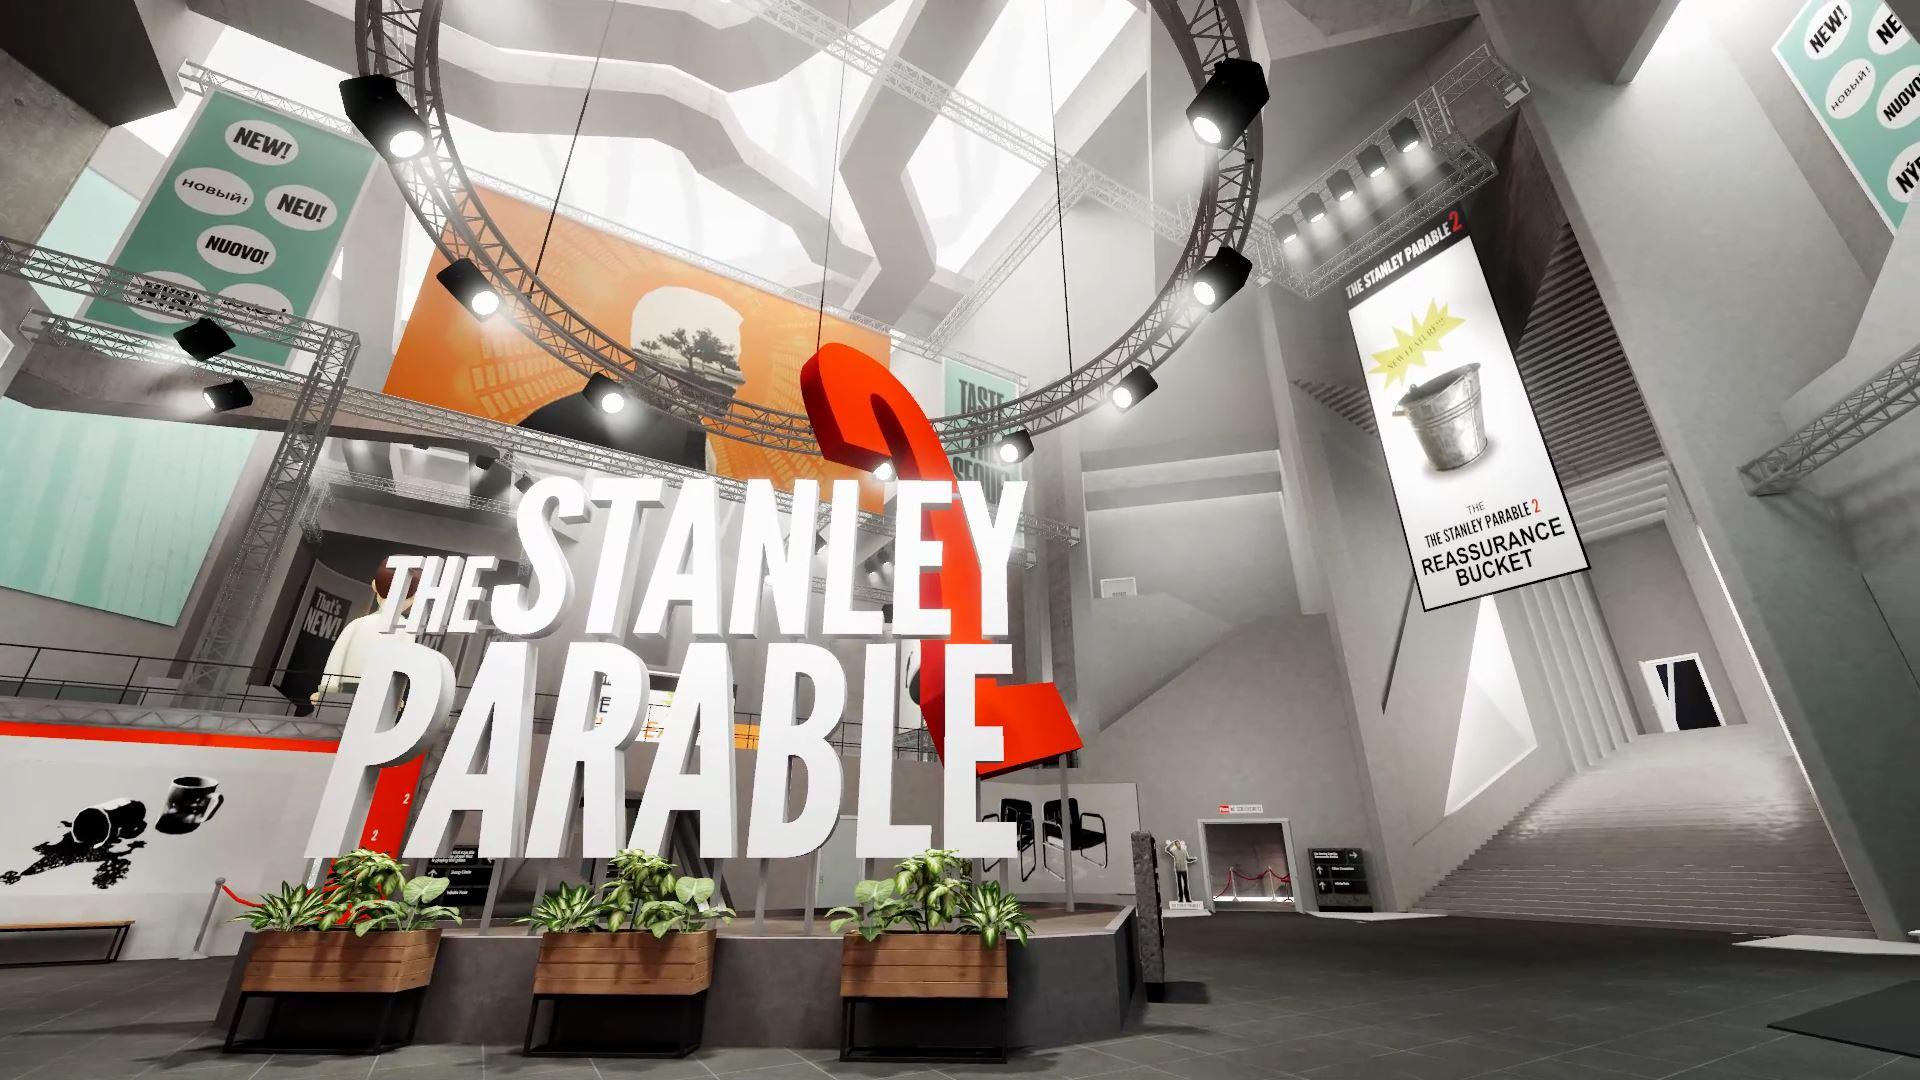 Ultra deluxe. The Stanley Parable Стэнли. The Stanley Parable: Ultra Deluxe. Стэнли парабл 2. Игра the Stanley Parable.